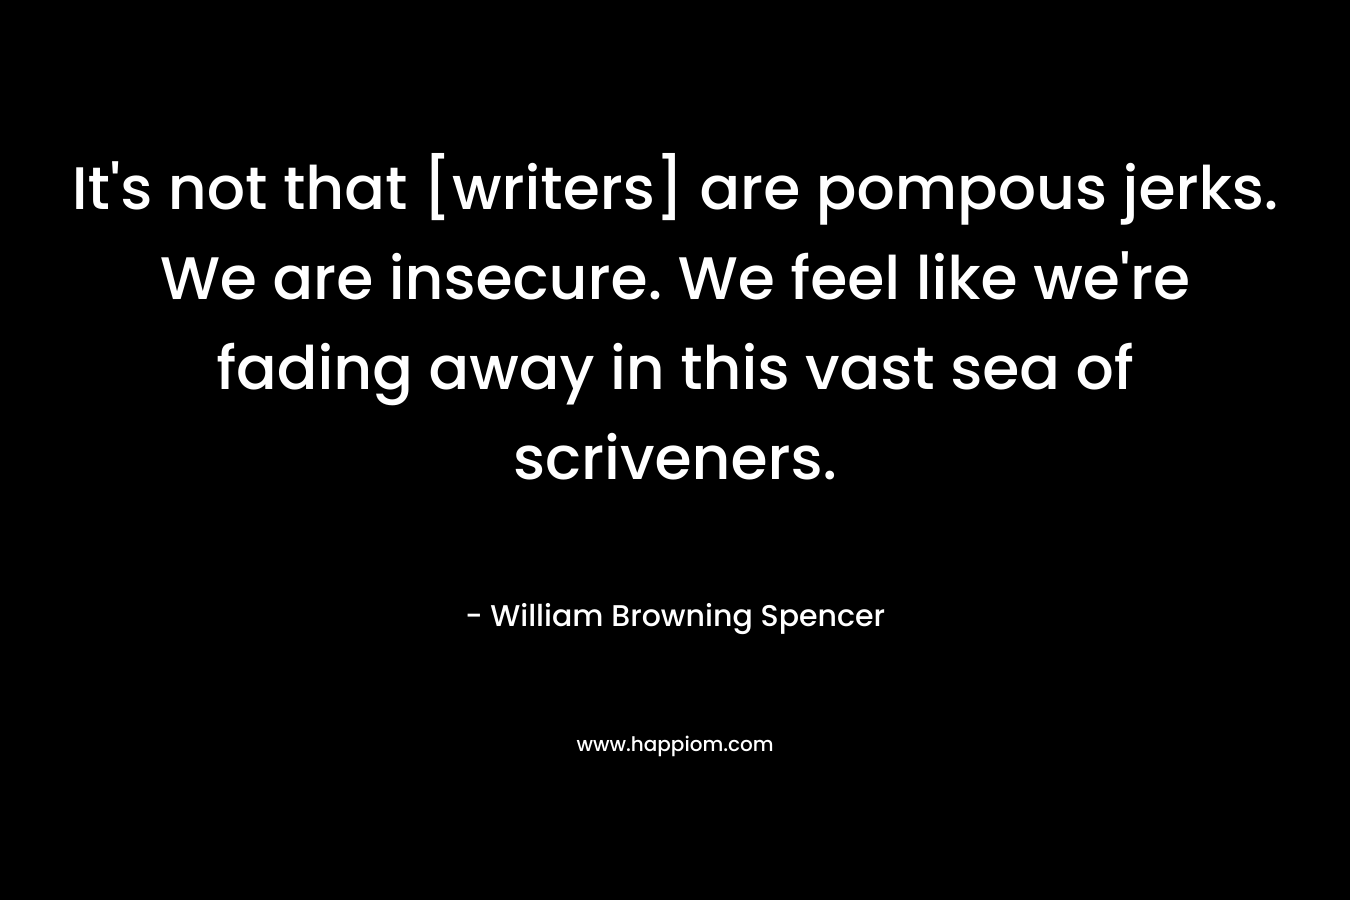 It’s not that [writers] are pompous jerks. We are insecure. We feel like we’re fading away in this vast sea of scriveners. – William Browning Spencer